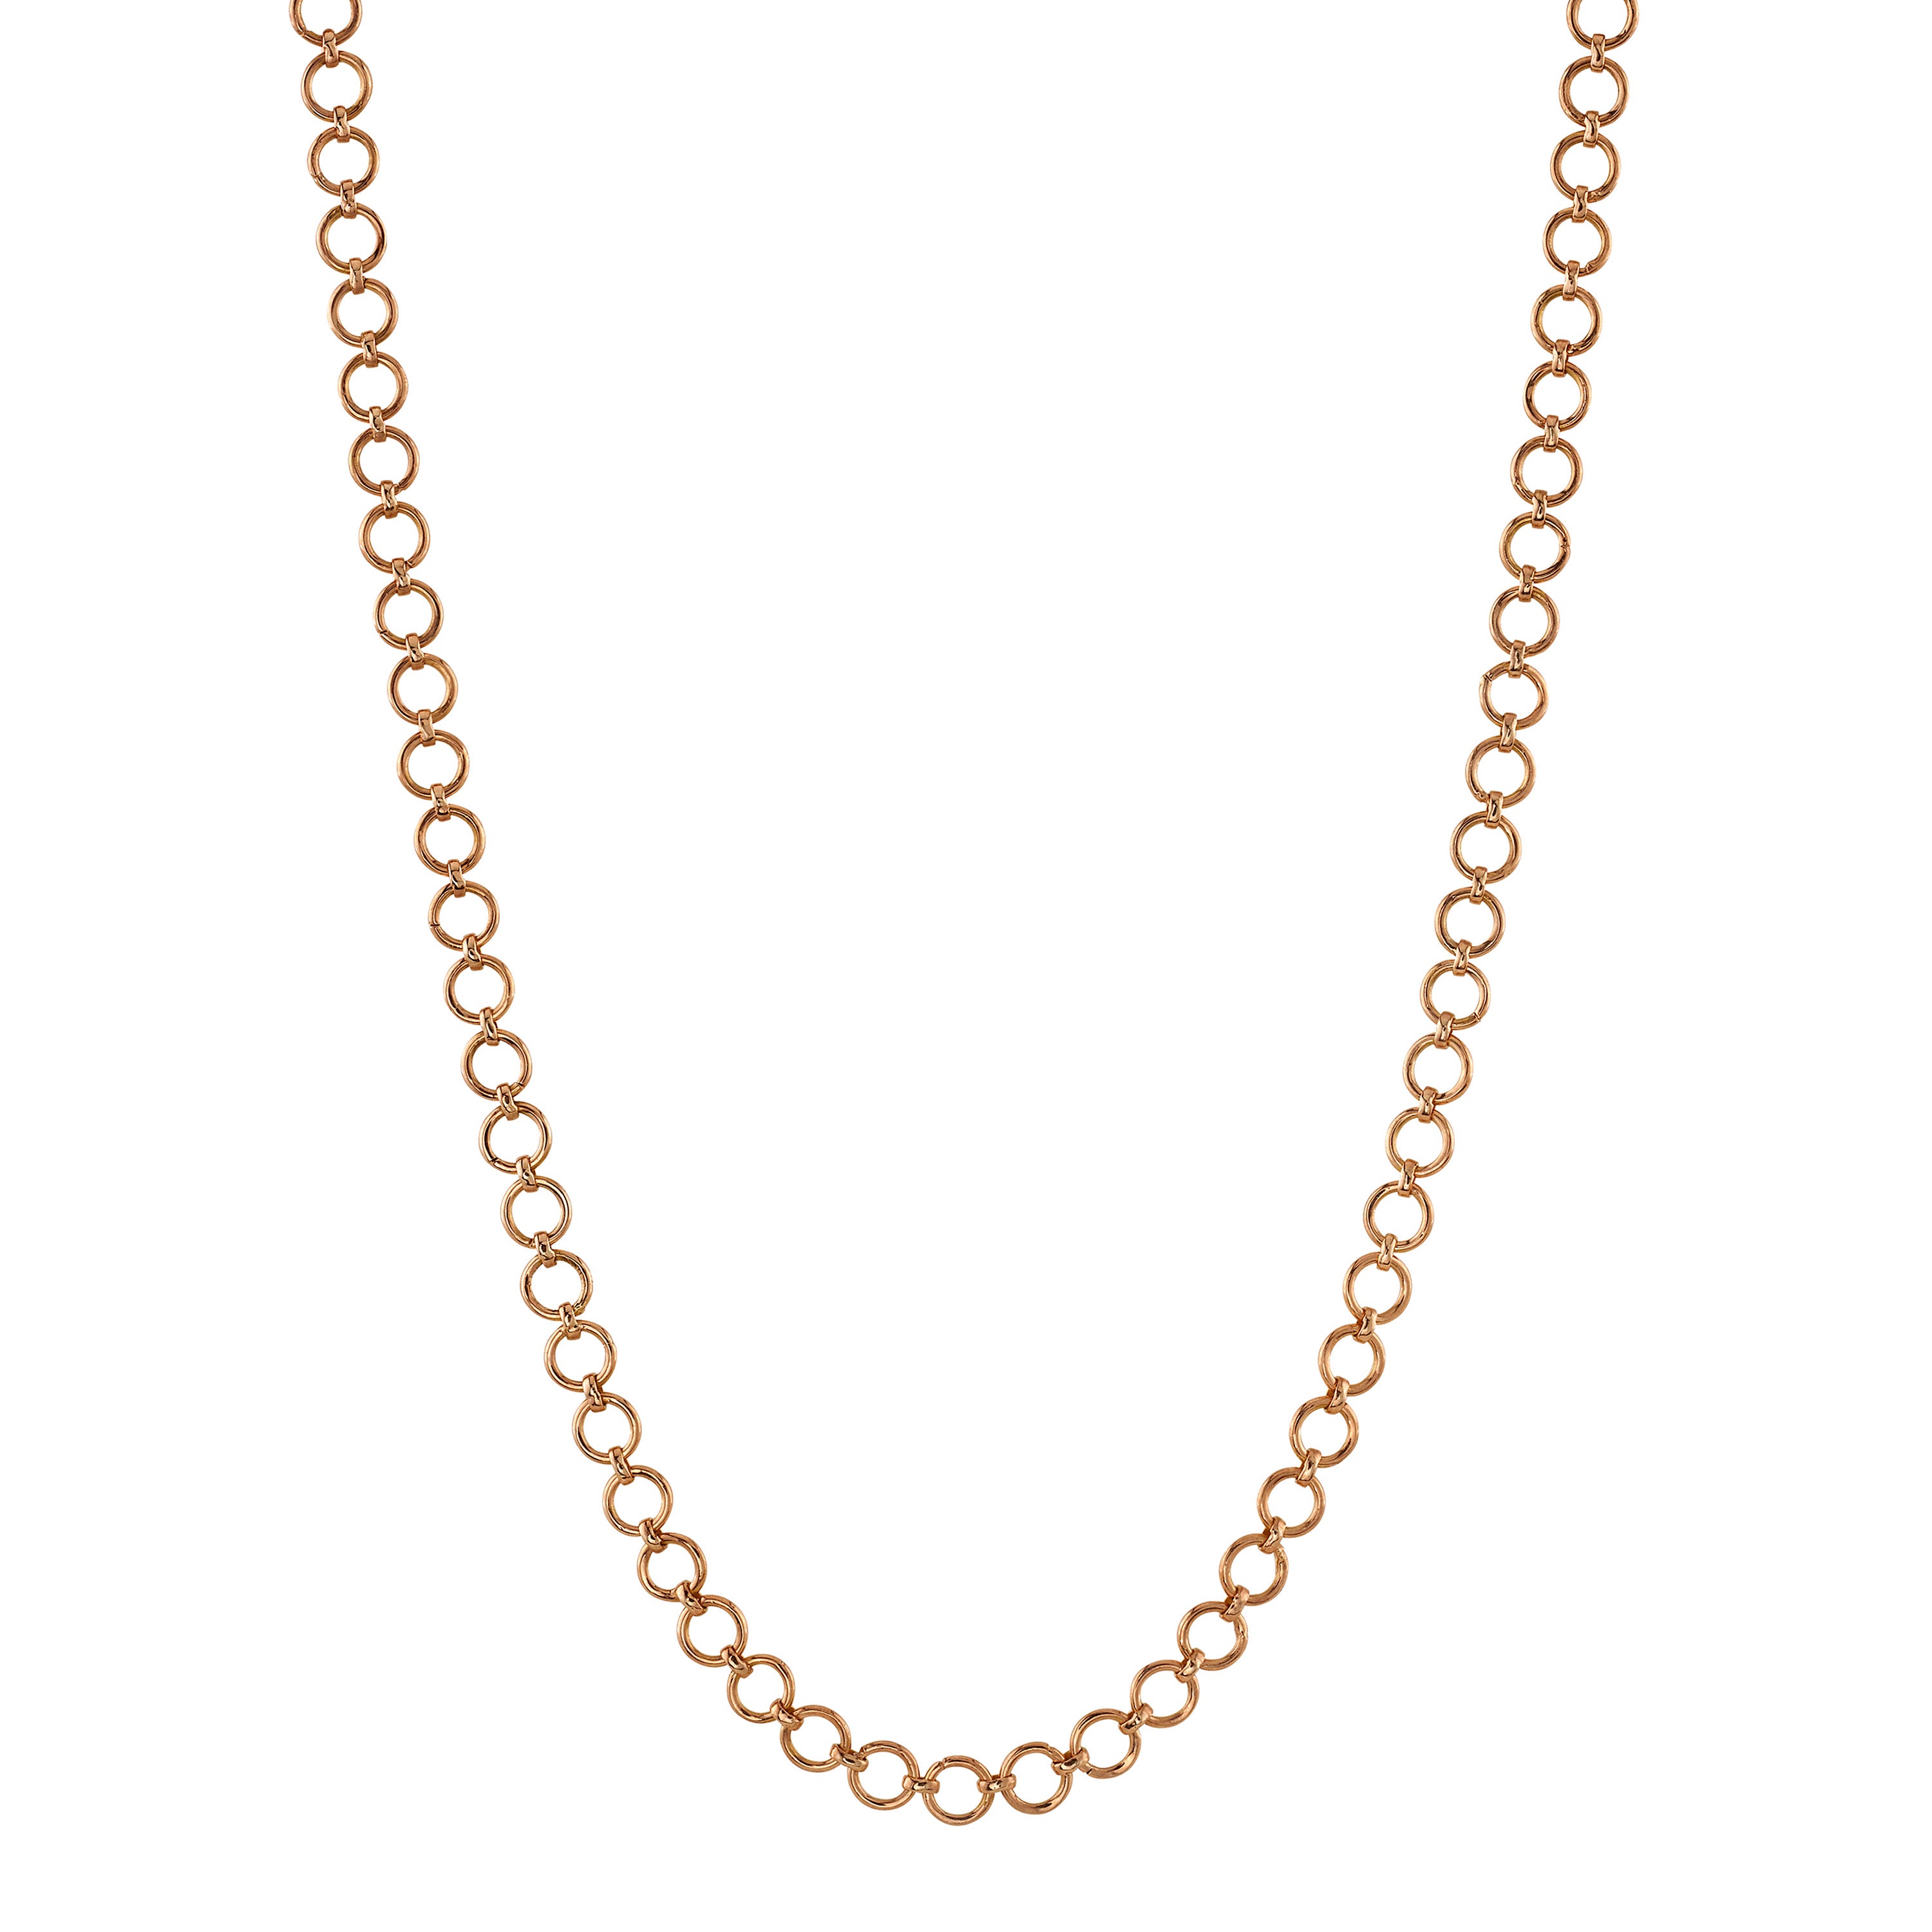 Large Loop Chain Necklace Chain Bare Collection   